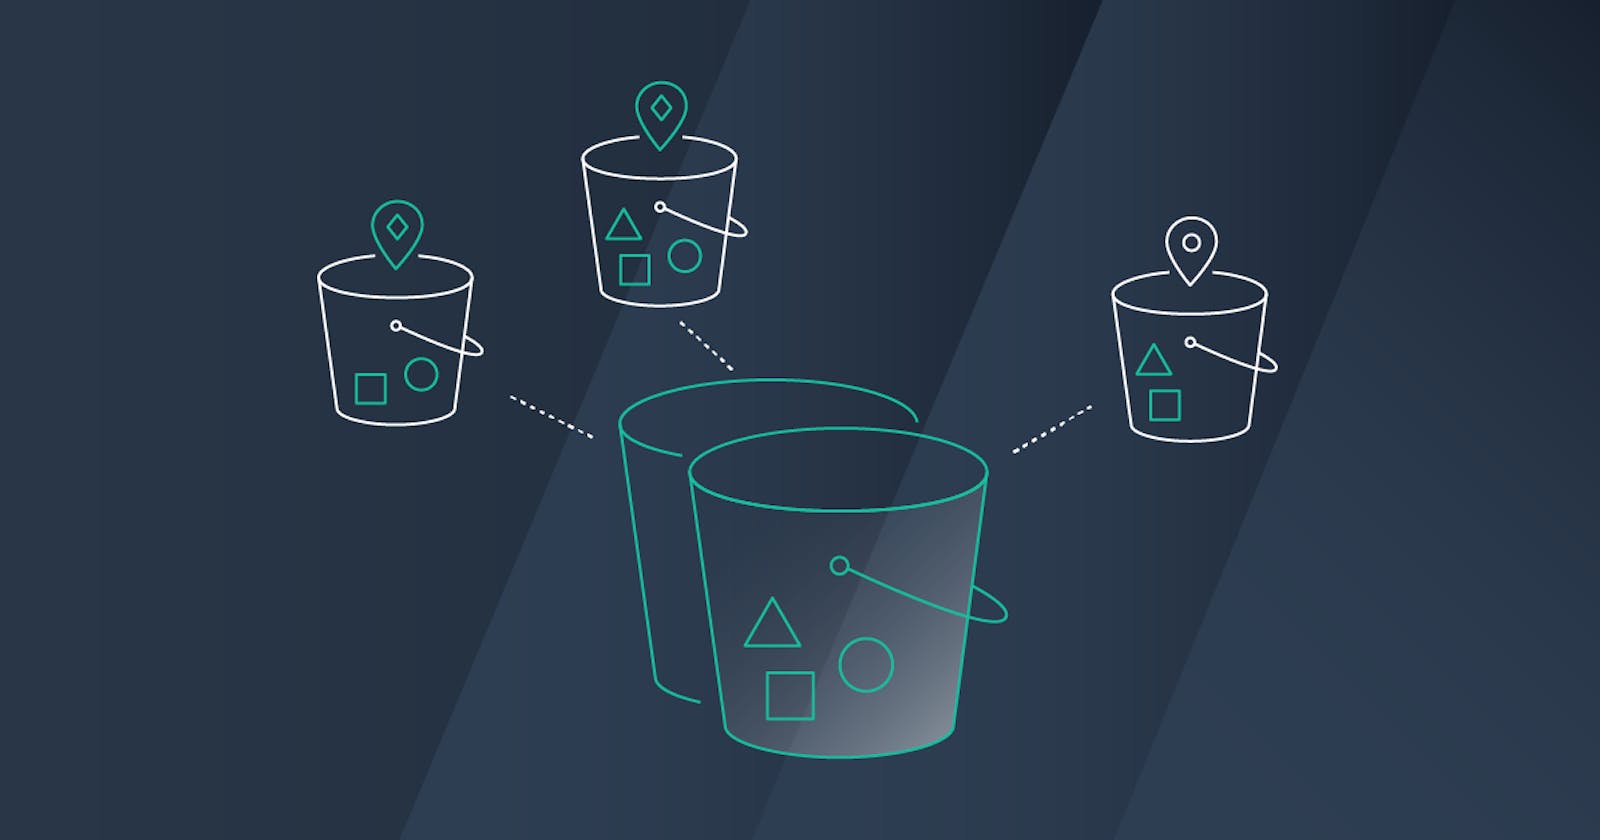 Migrating an S3 bucket to another AWS account with S3 Replication